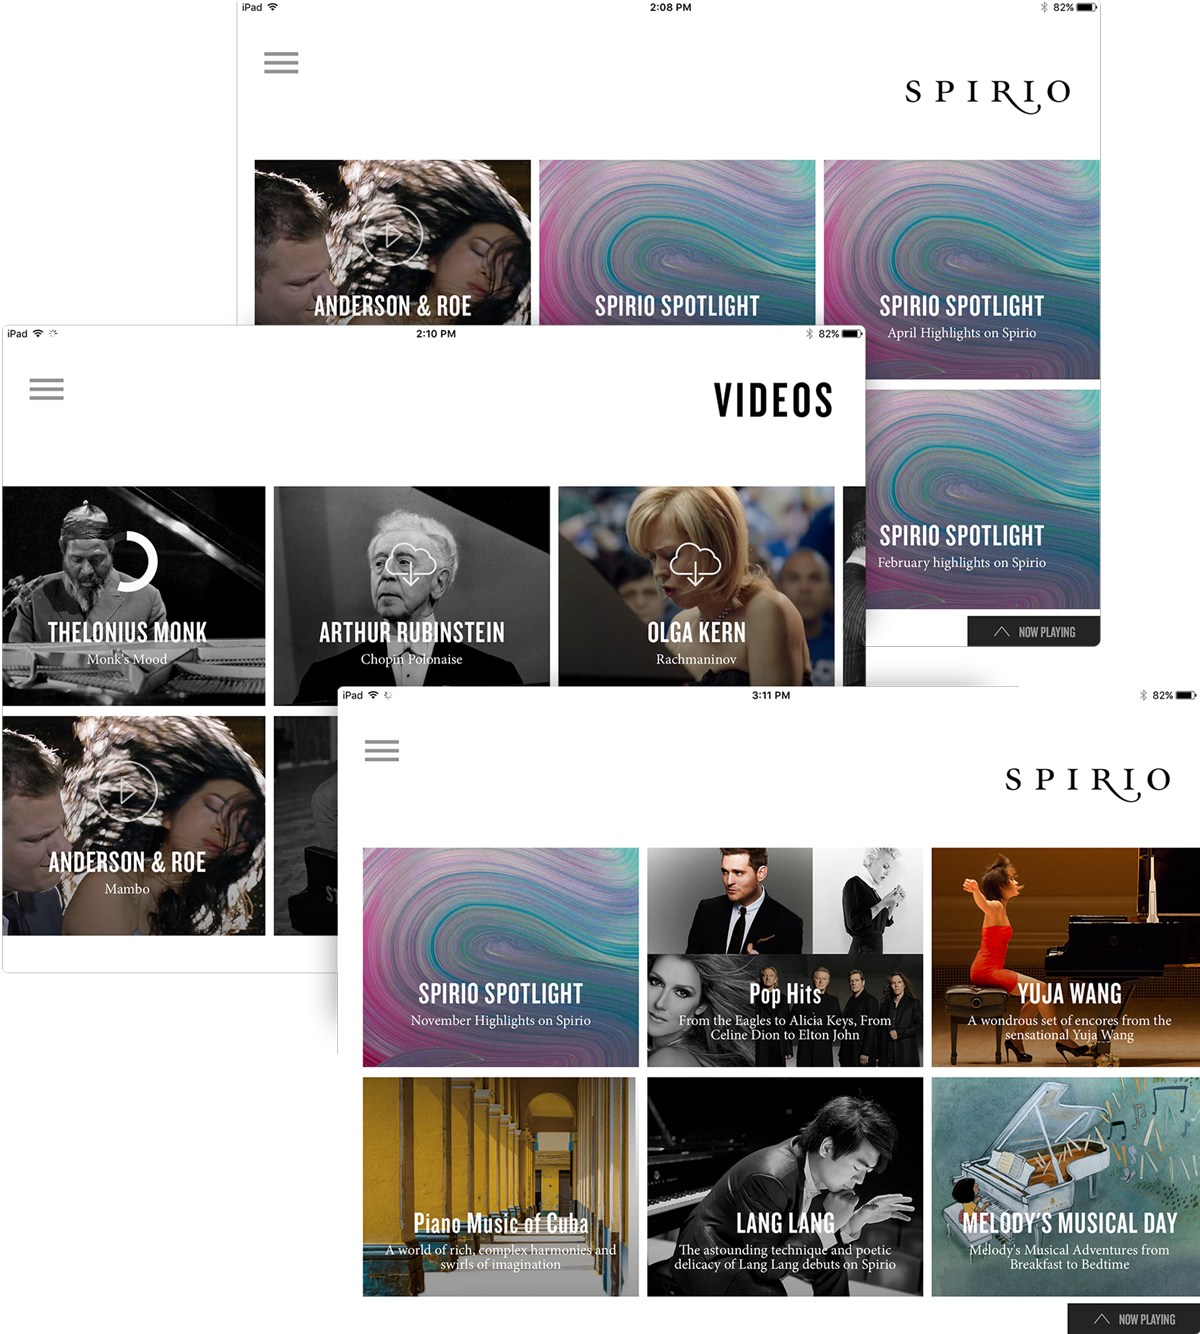 Three screenshots from the Steinway Spirio iPad app of different music and artist selections, including videos.